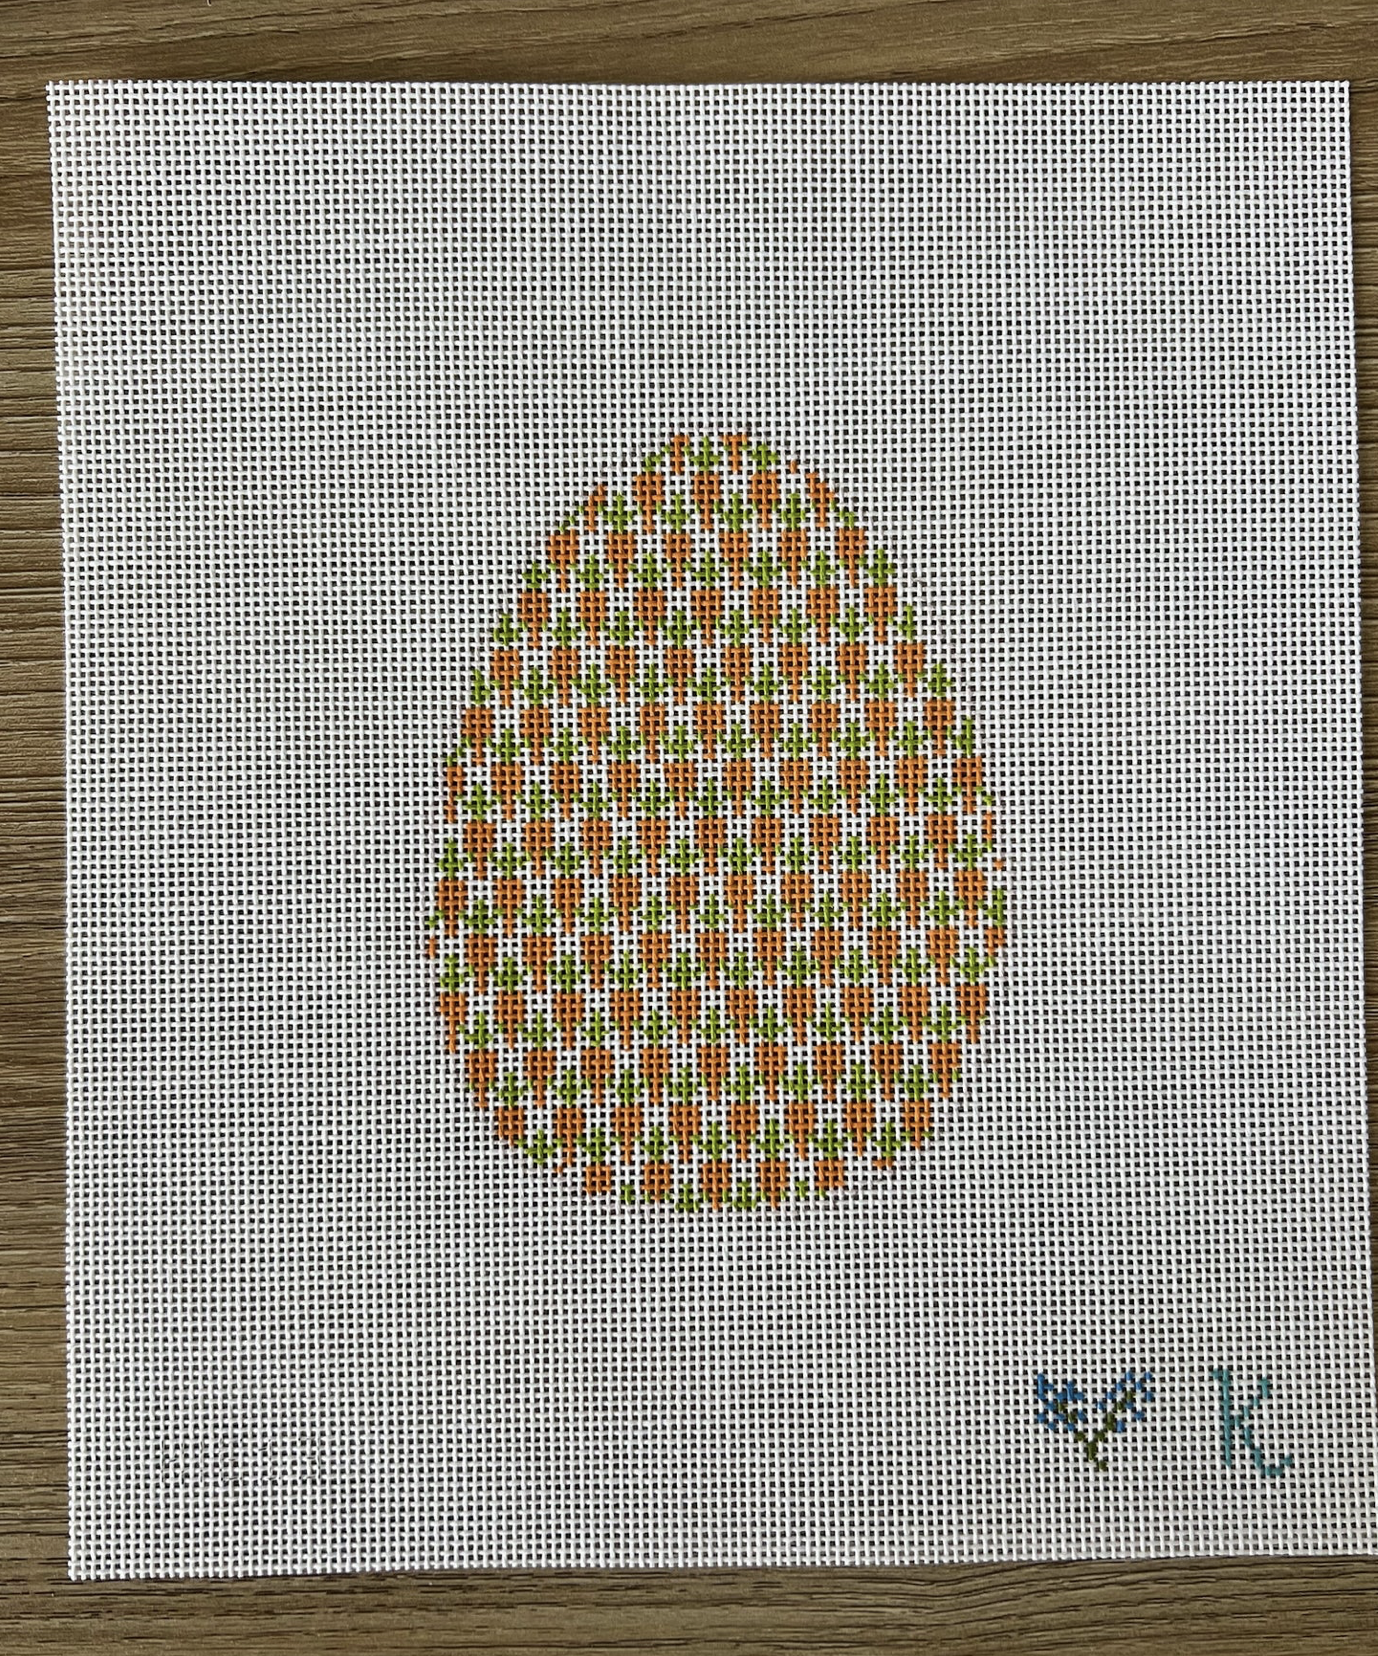 Canvas EGG WITH CARROTS  KIE13